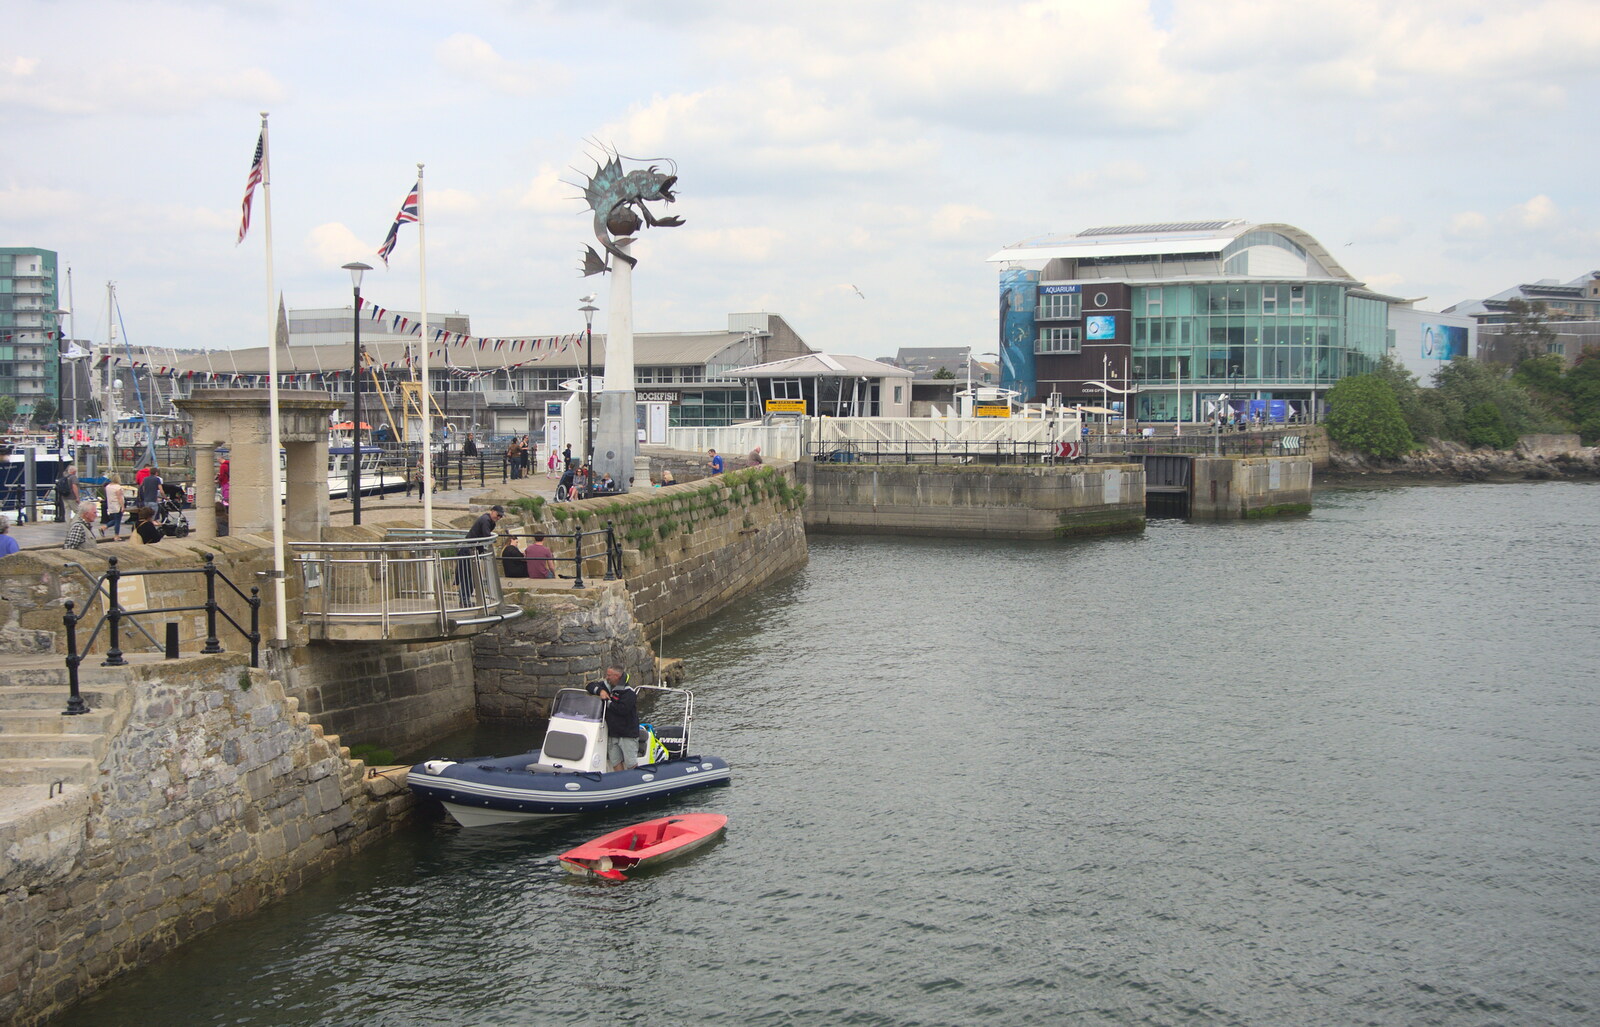 Mayflower Pier from A Tamar River Trip, Plymouth, Devon - 30th May 2016